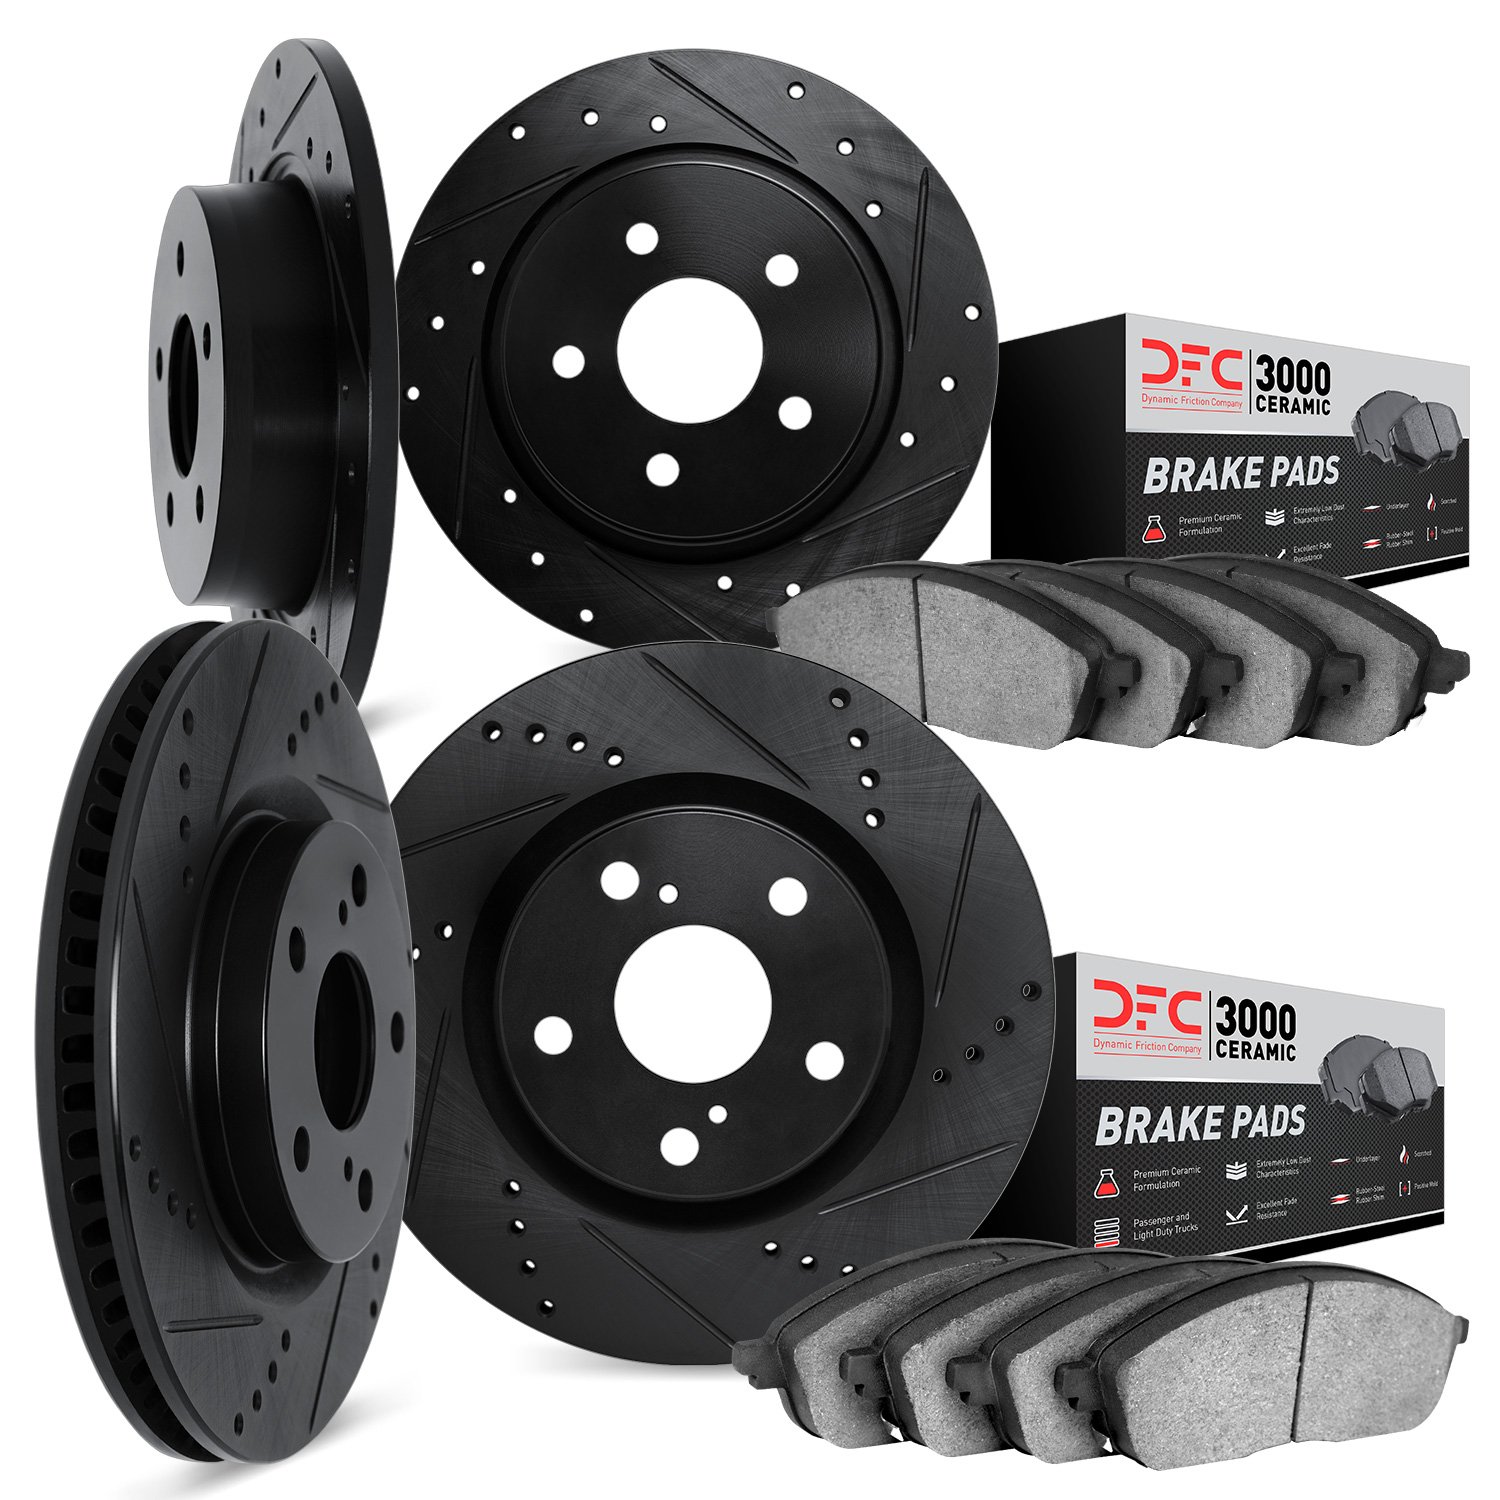 8304-13048 Drilled/Slotted Brake Rotors with 3000-Series Ceramic Brake Pads Kit [Black], Fits Select Subaru, Position: Front and